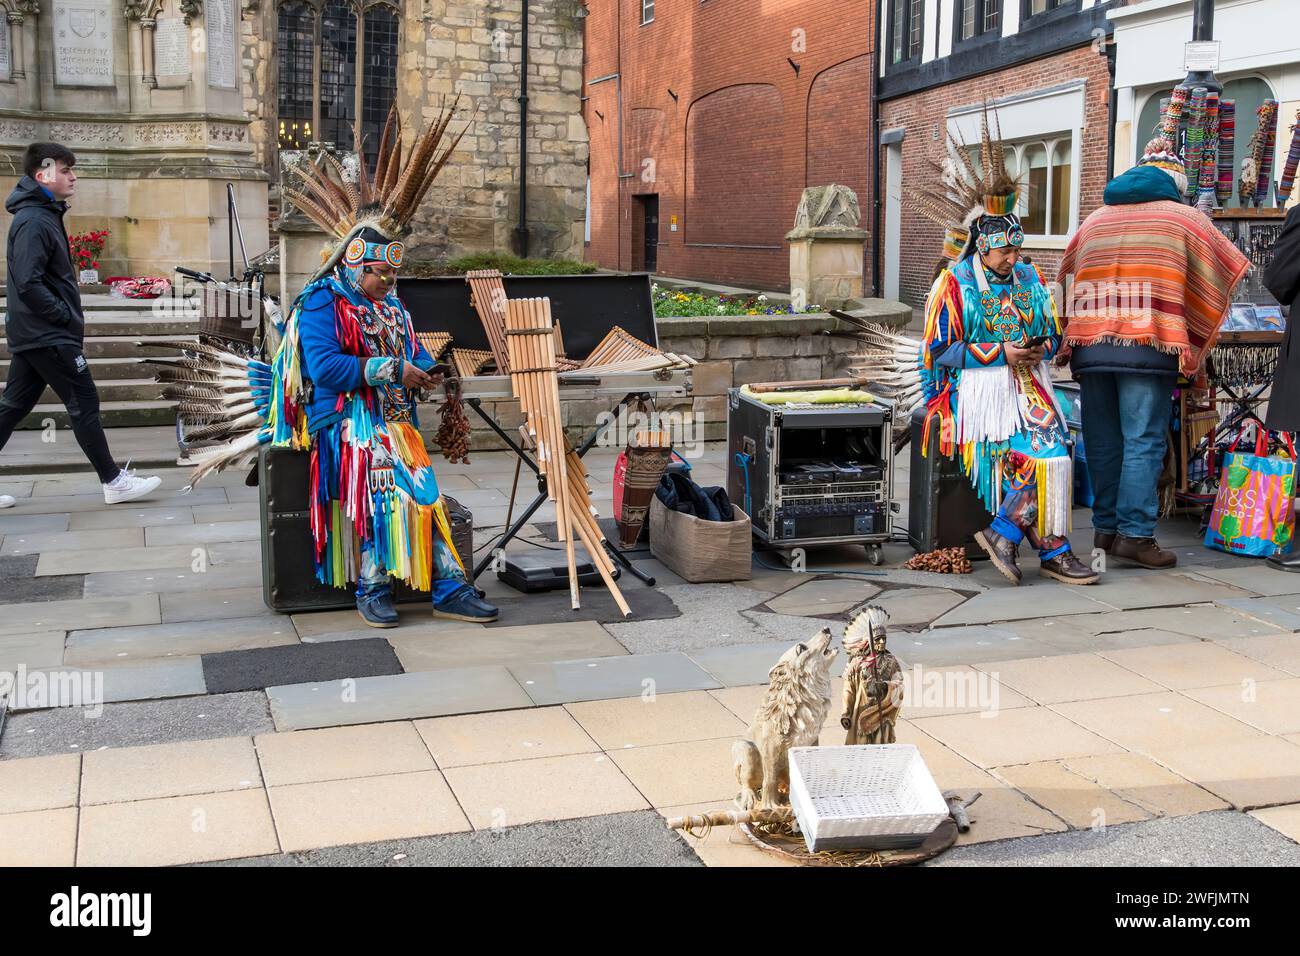 Two Inca performers taking break, High Street, Lincoln City, Lincolnshire, England, UK Stock Photo